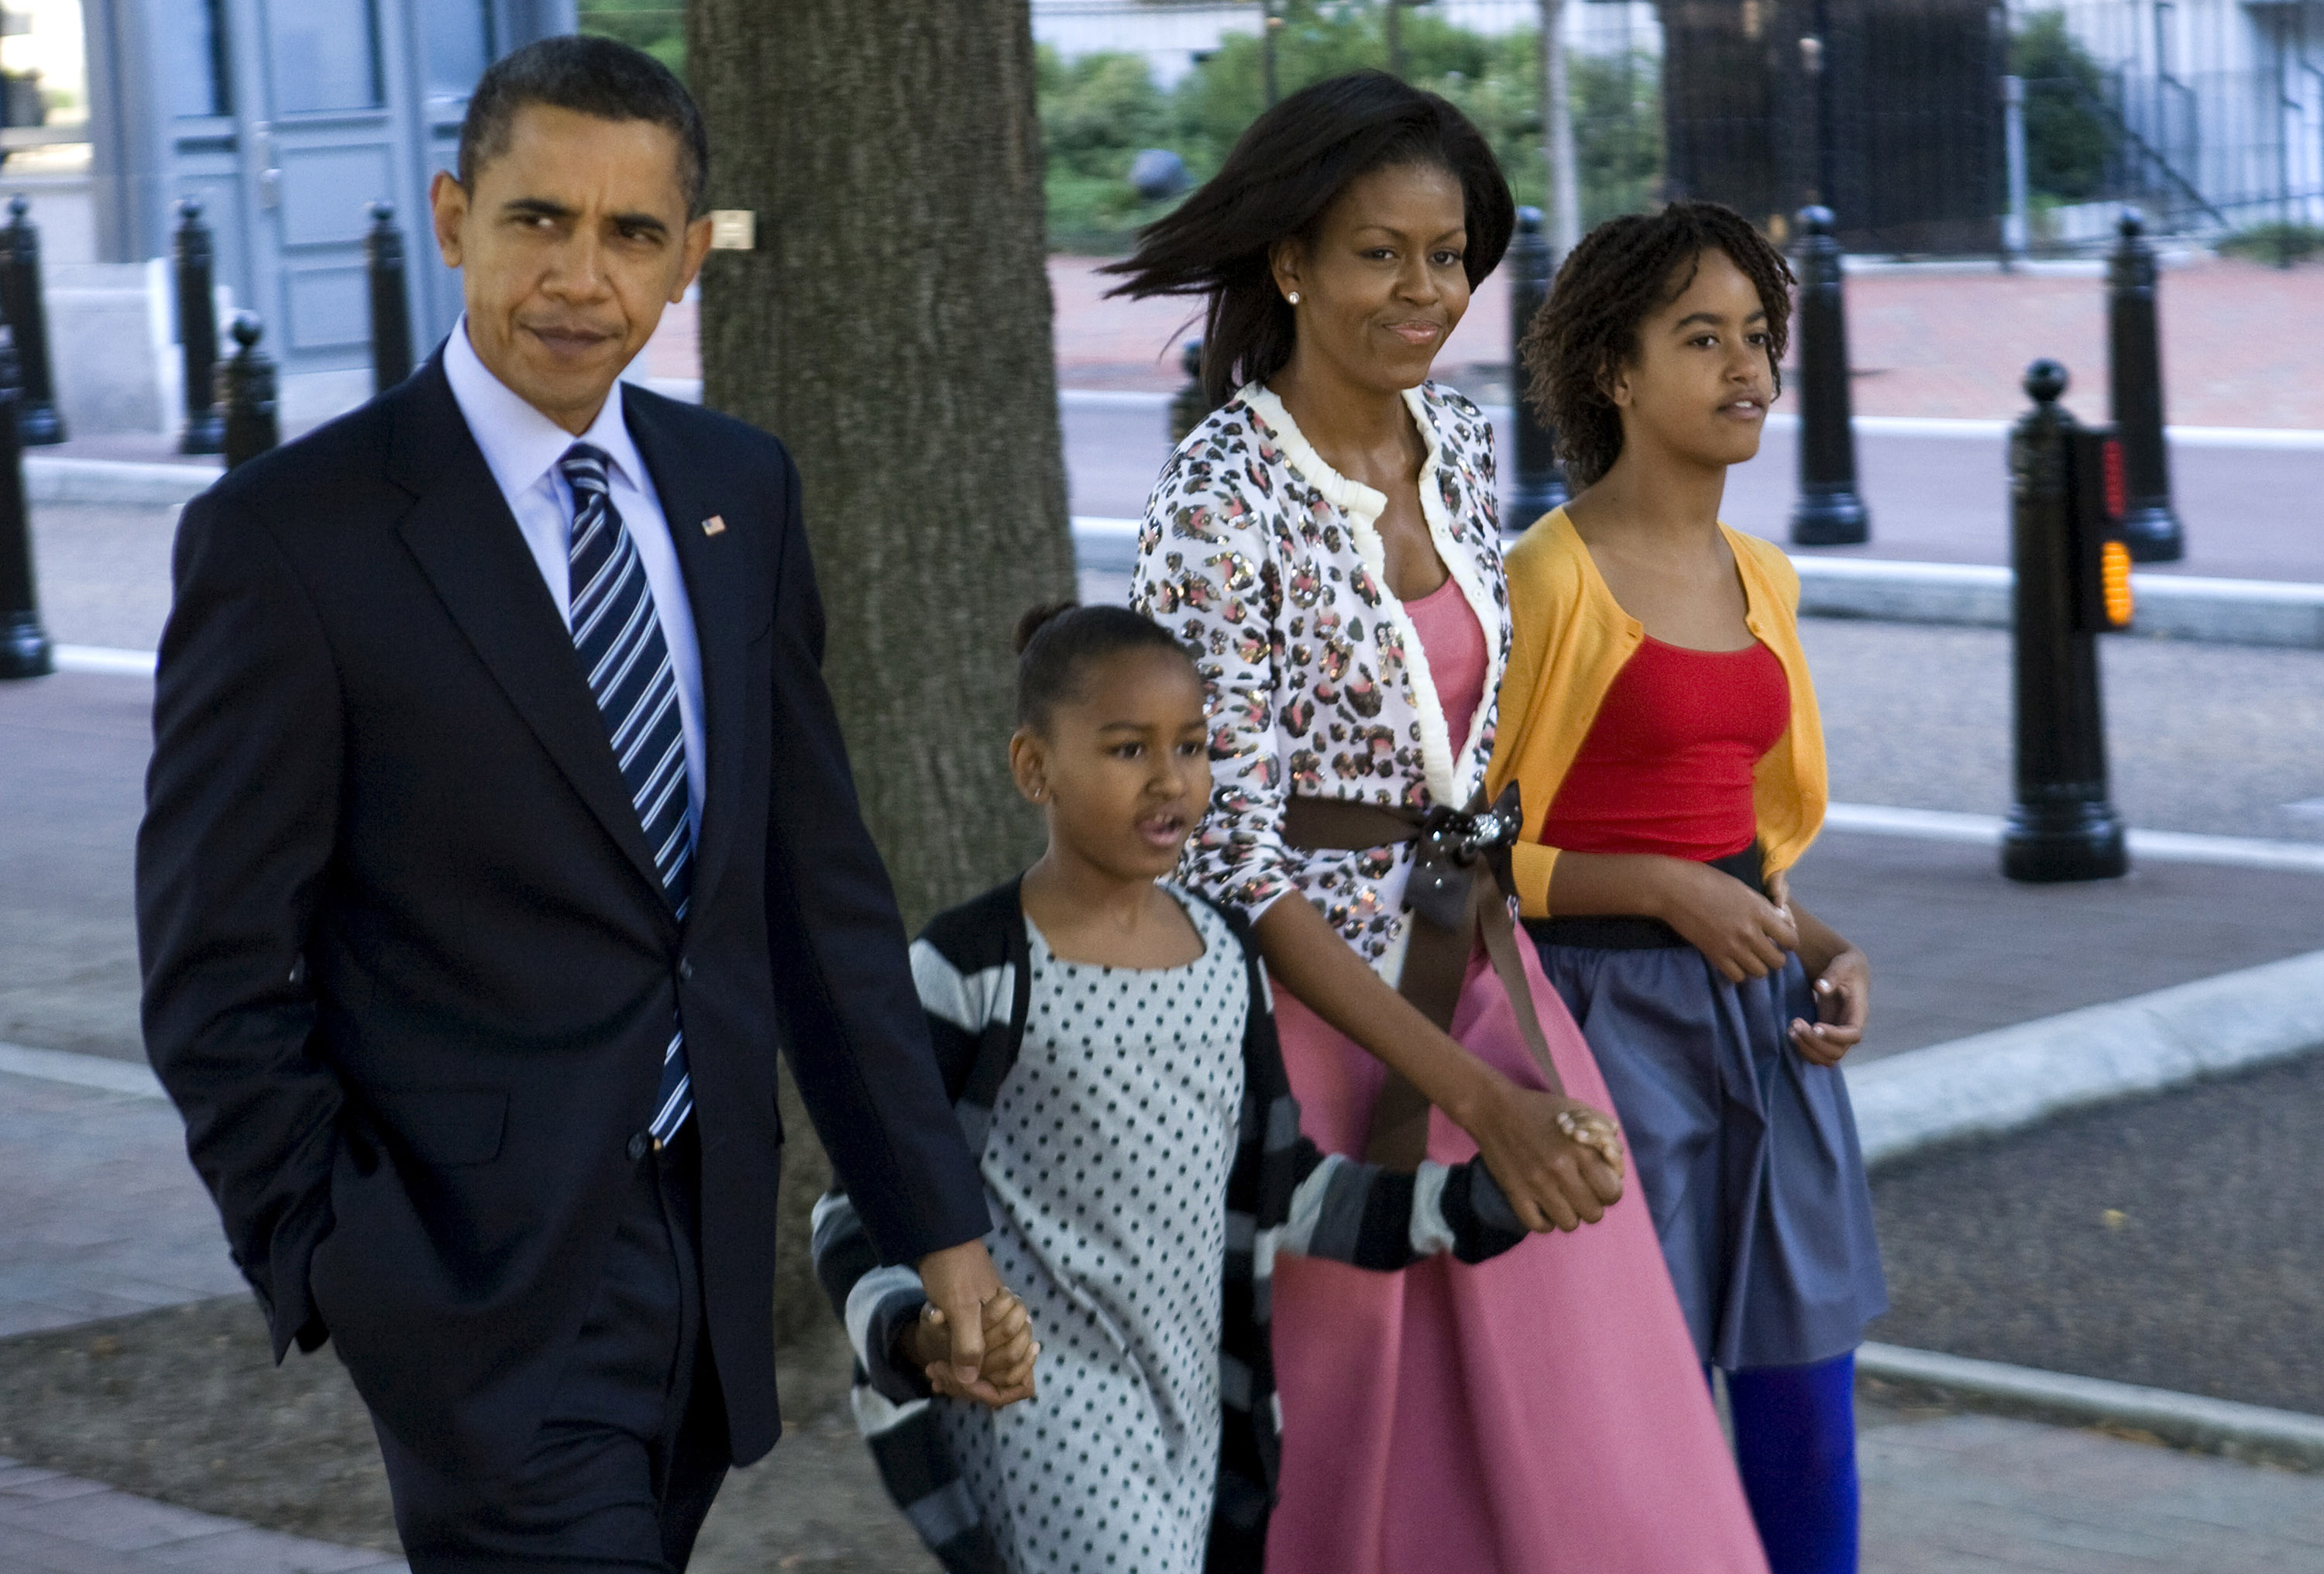 Barack, Sasha, Michelle, and Malia Obama walking across Pennsylvania Avenue as they return from a morning service at St. John's Episcopal Church in Washington, D.C. on October 11, 2009. | Source: Getty Images